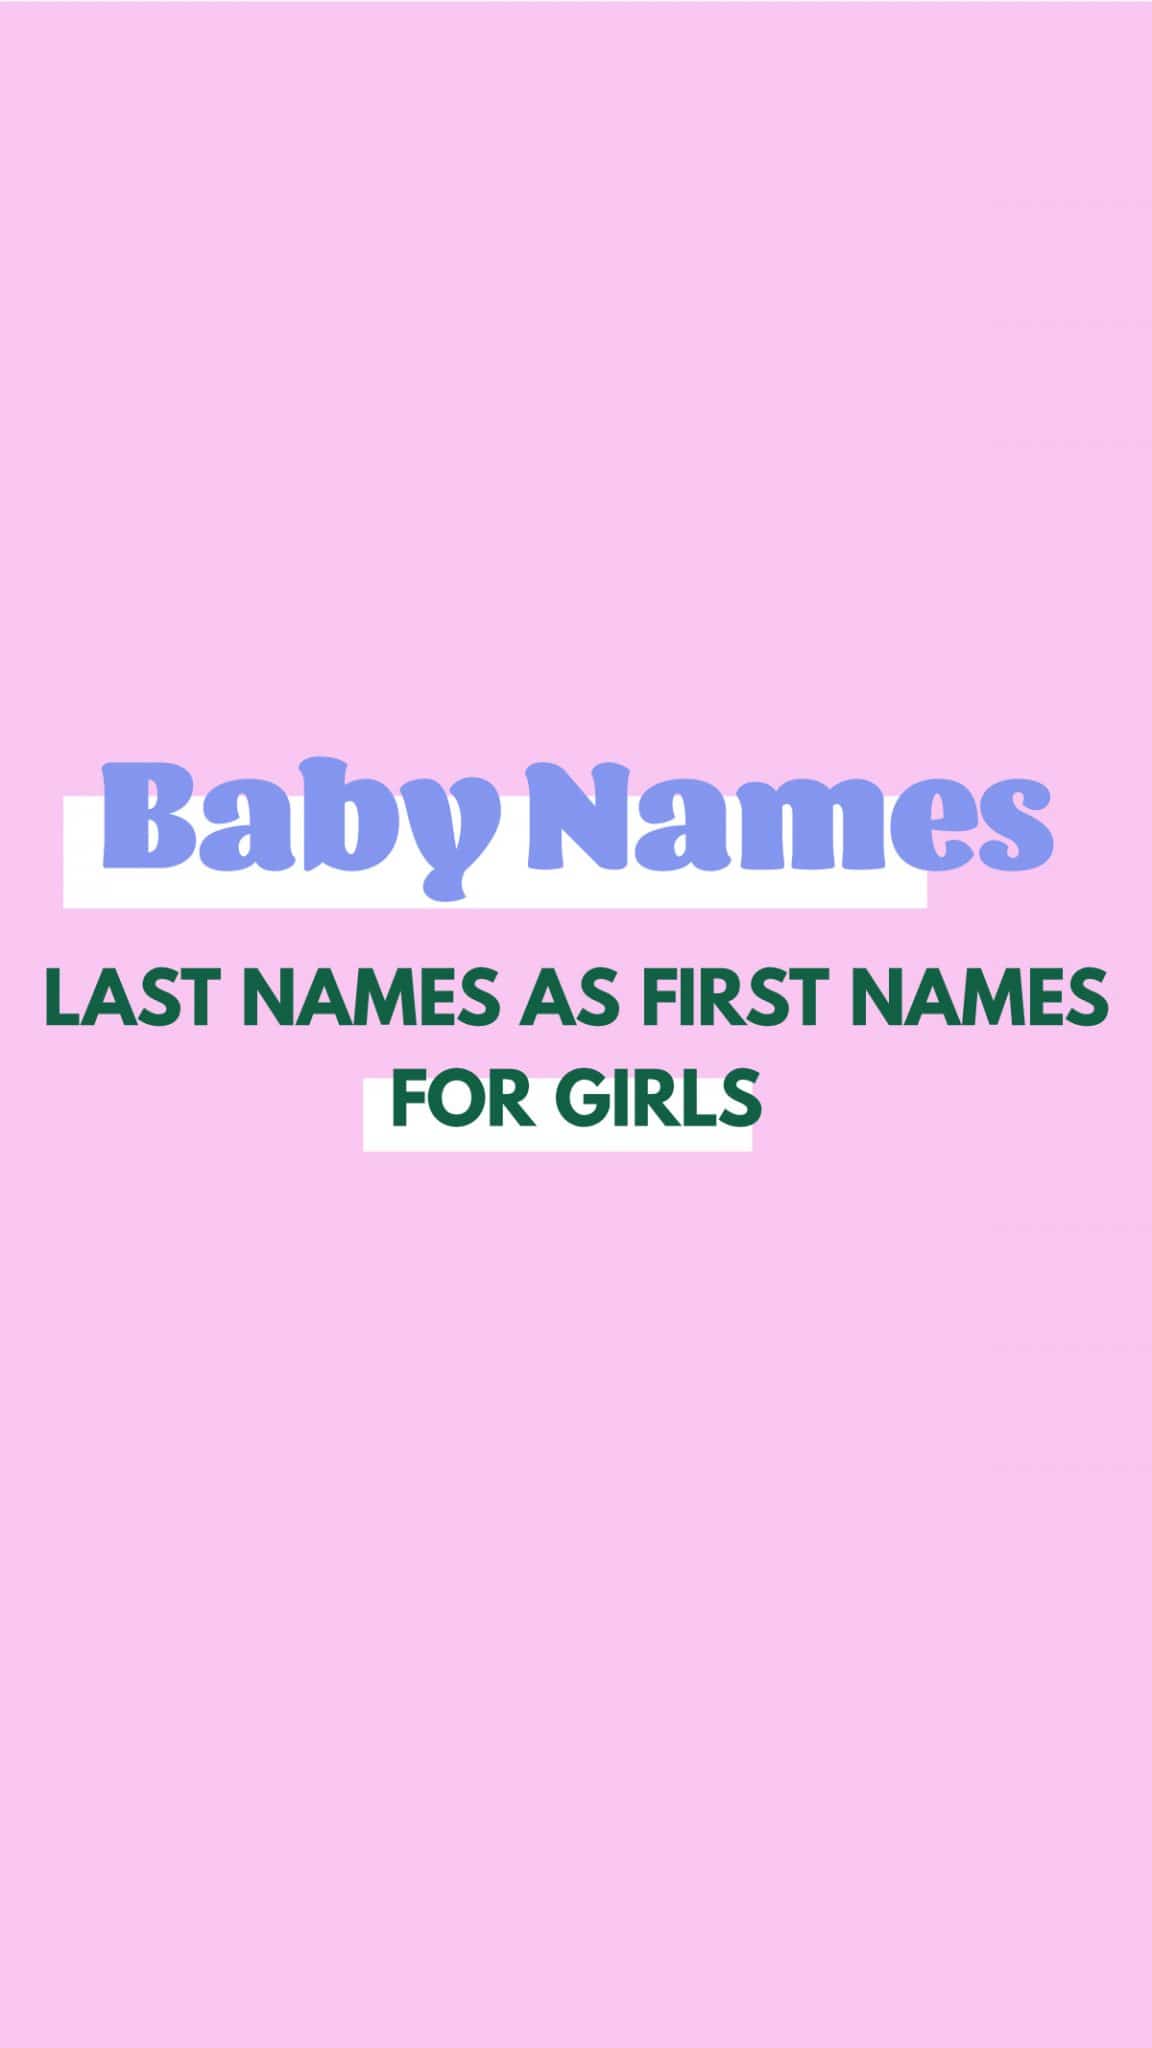 Find Surnames That Match Fist Names